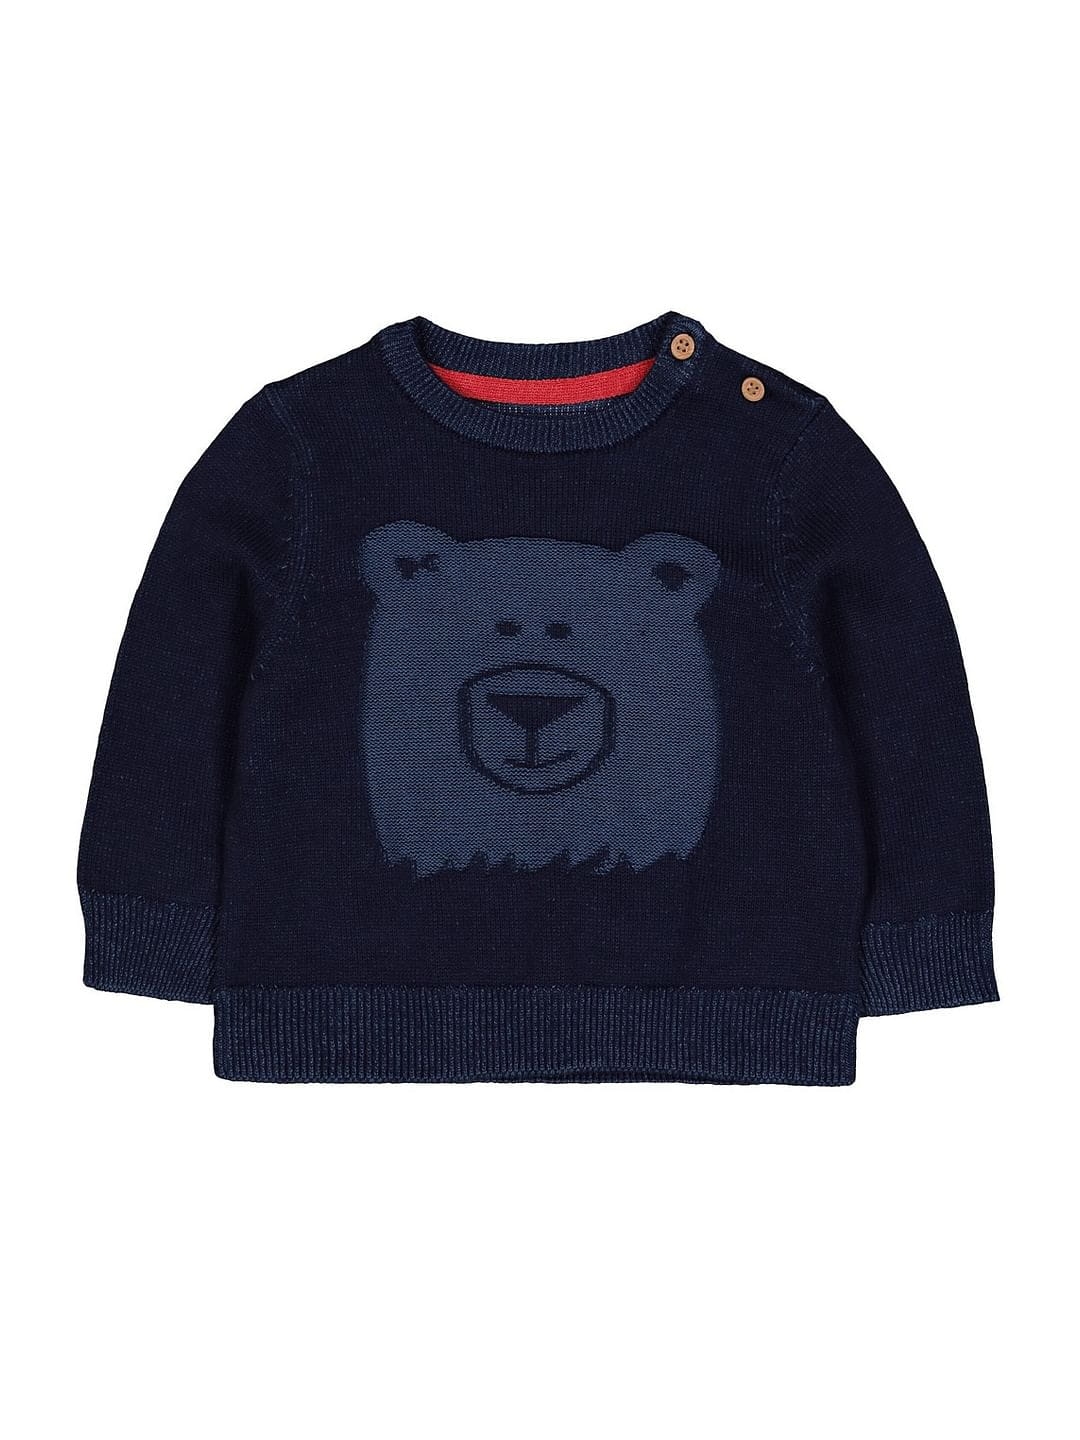 Mothercare | Navy Bear Knitted Jumper 0